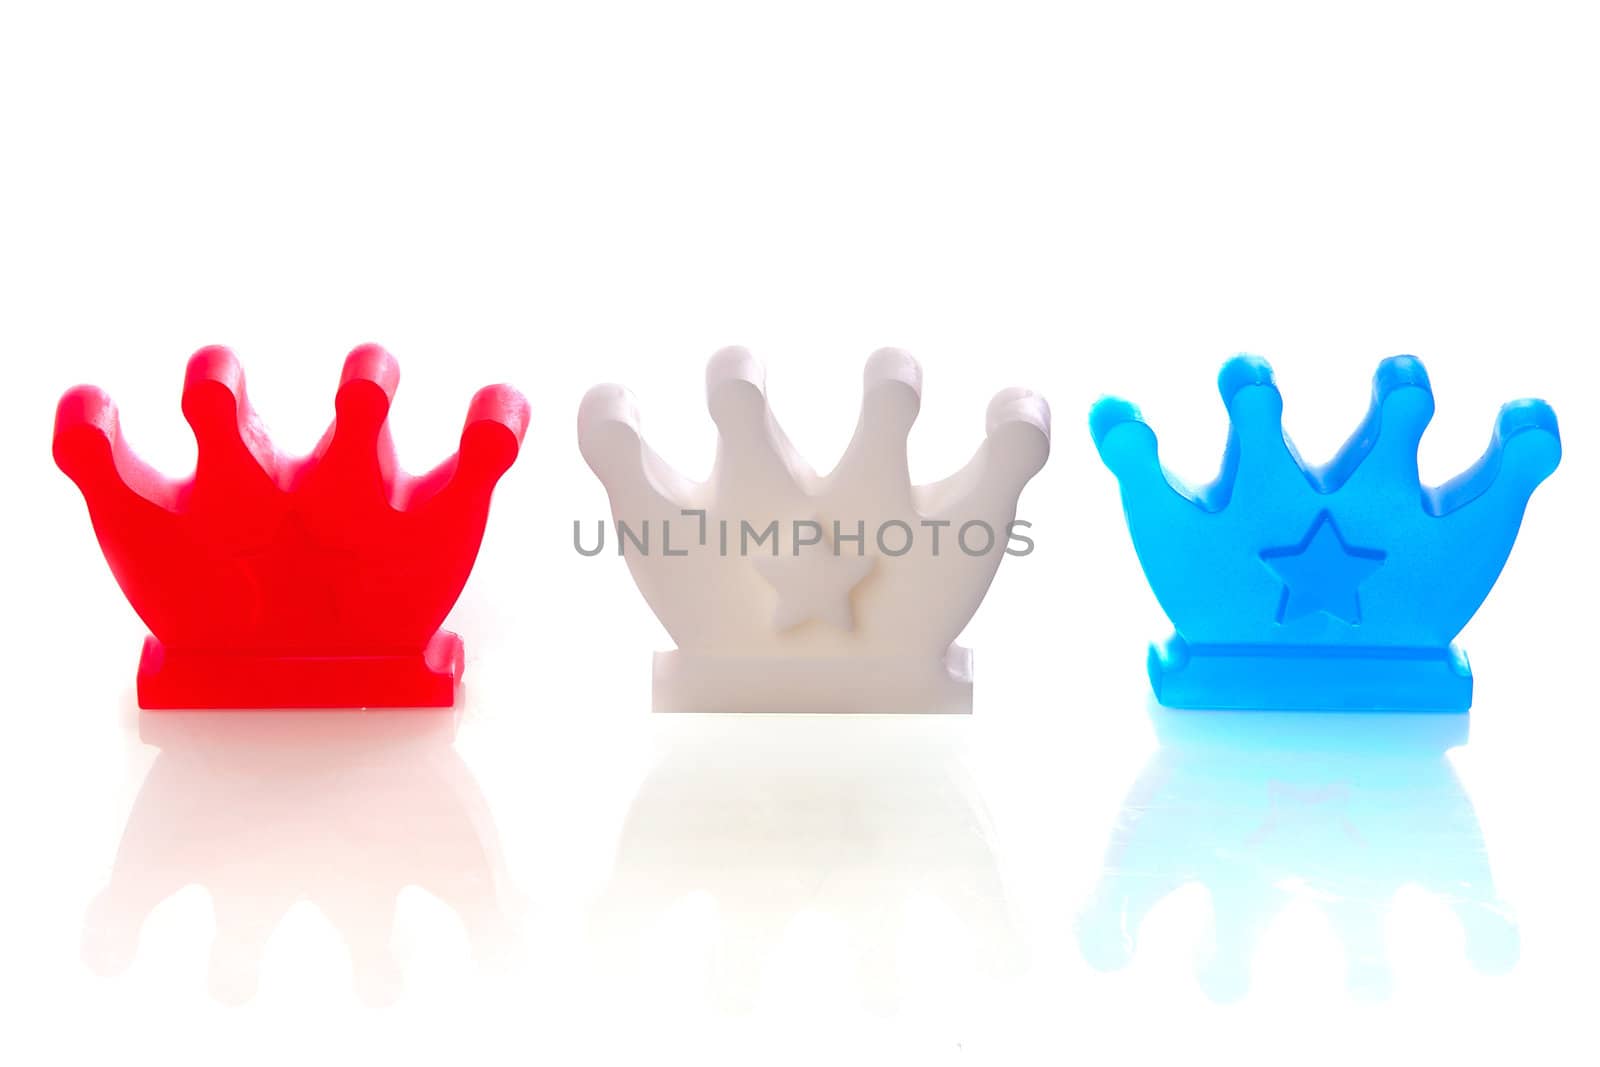 crowns in the color red, white, and blue, symbol of the dutch coronation on 30th of april 2013